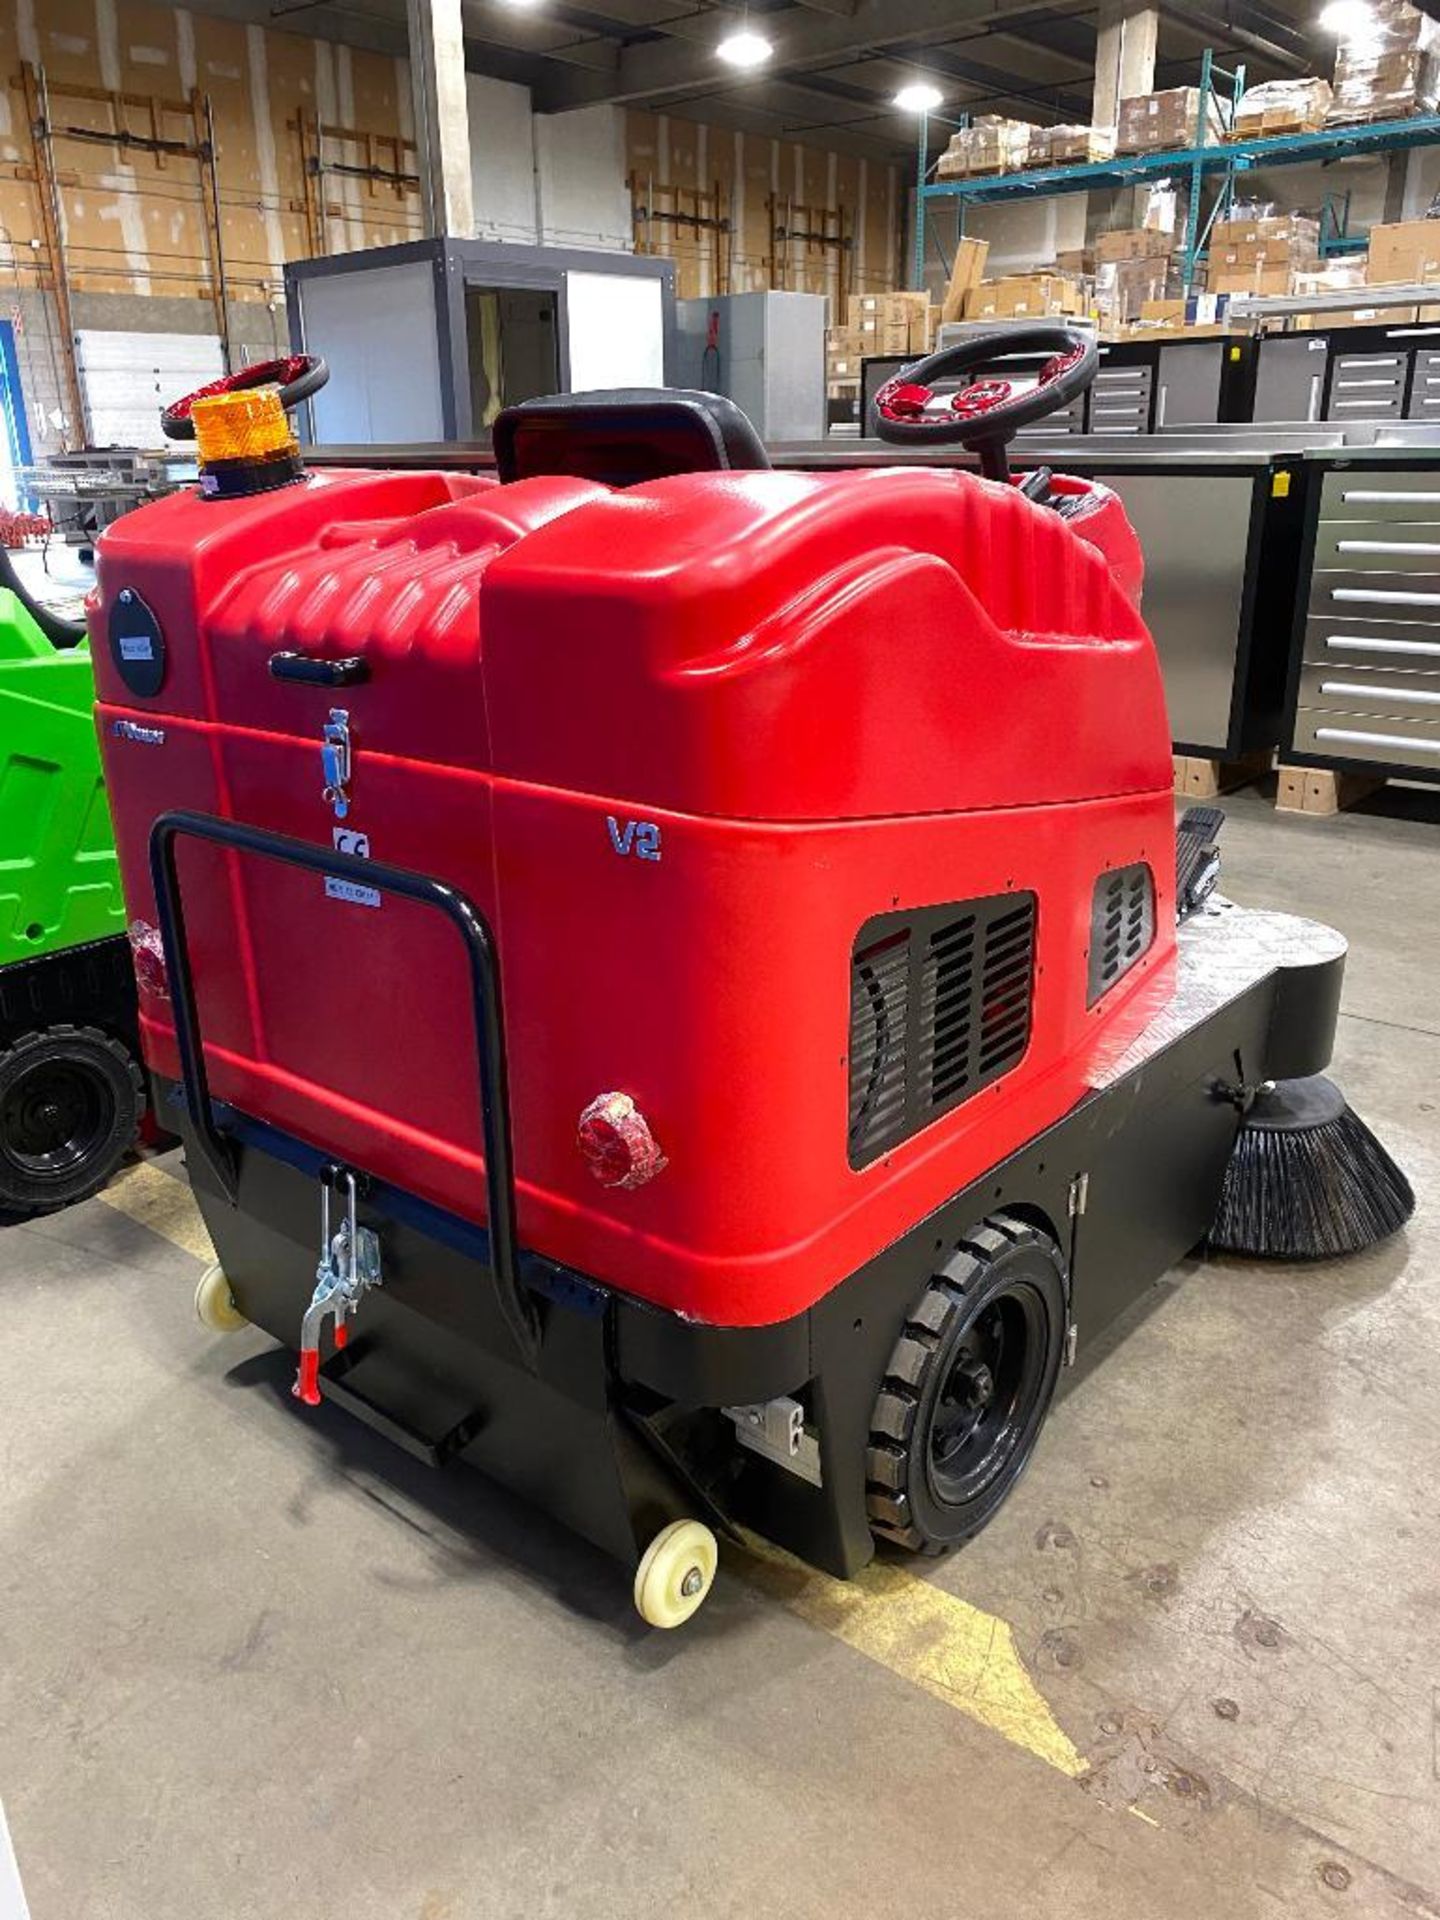 New 2022 Aokeqi 0S-V2 55" Wide Ride-On Electric Industrial Floor Sweeper - Image 3 of 10